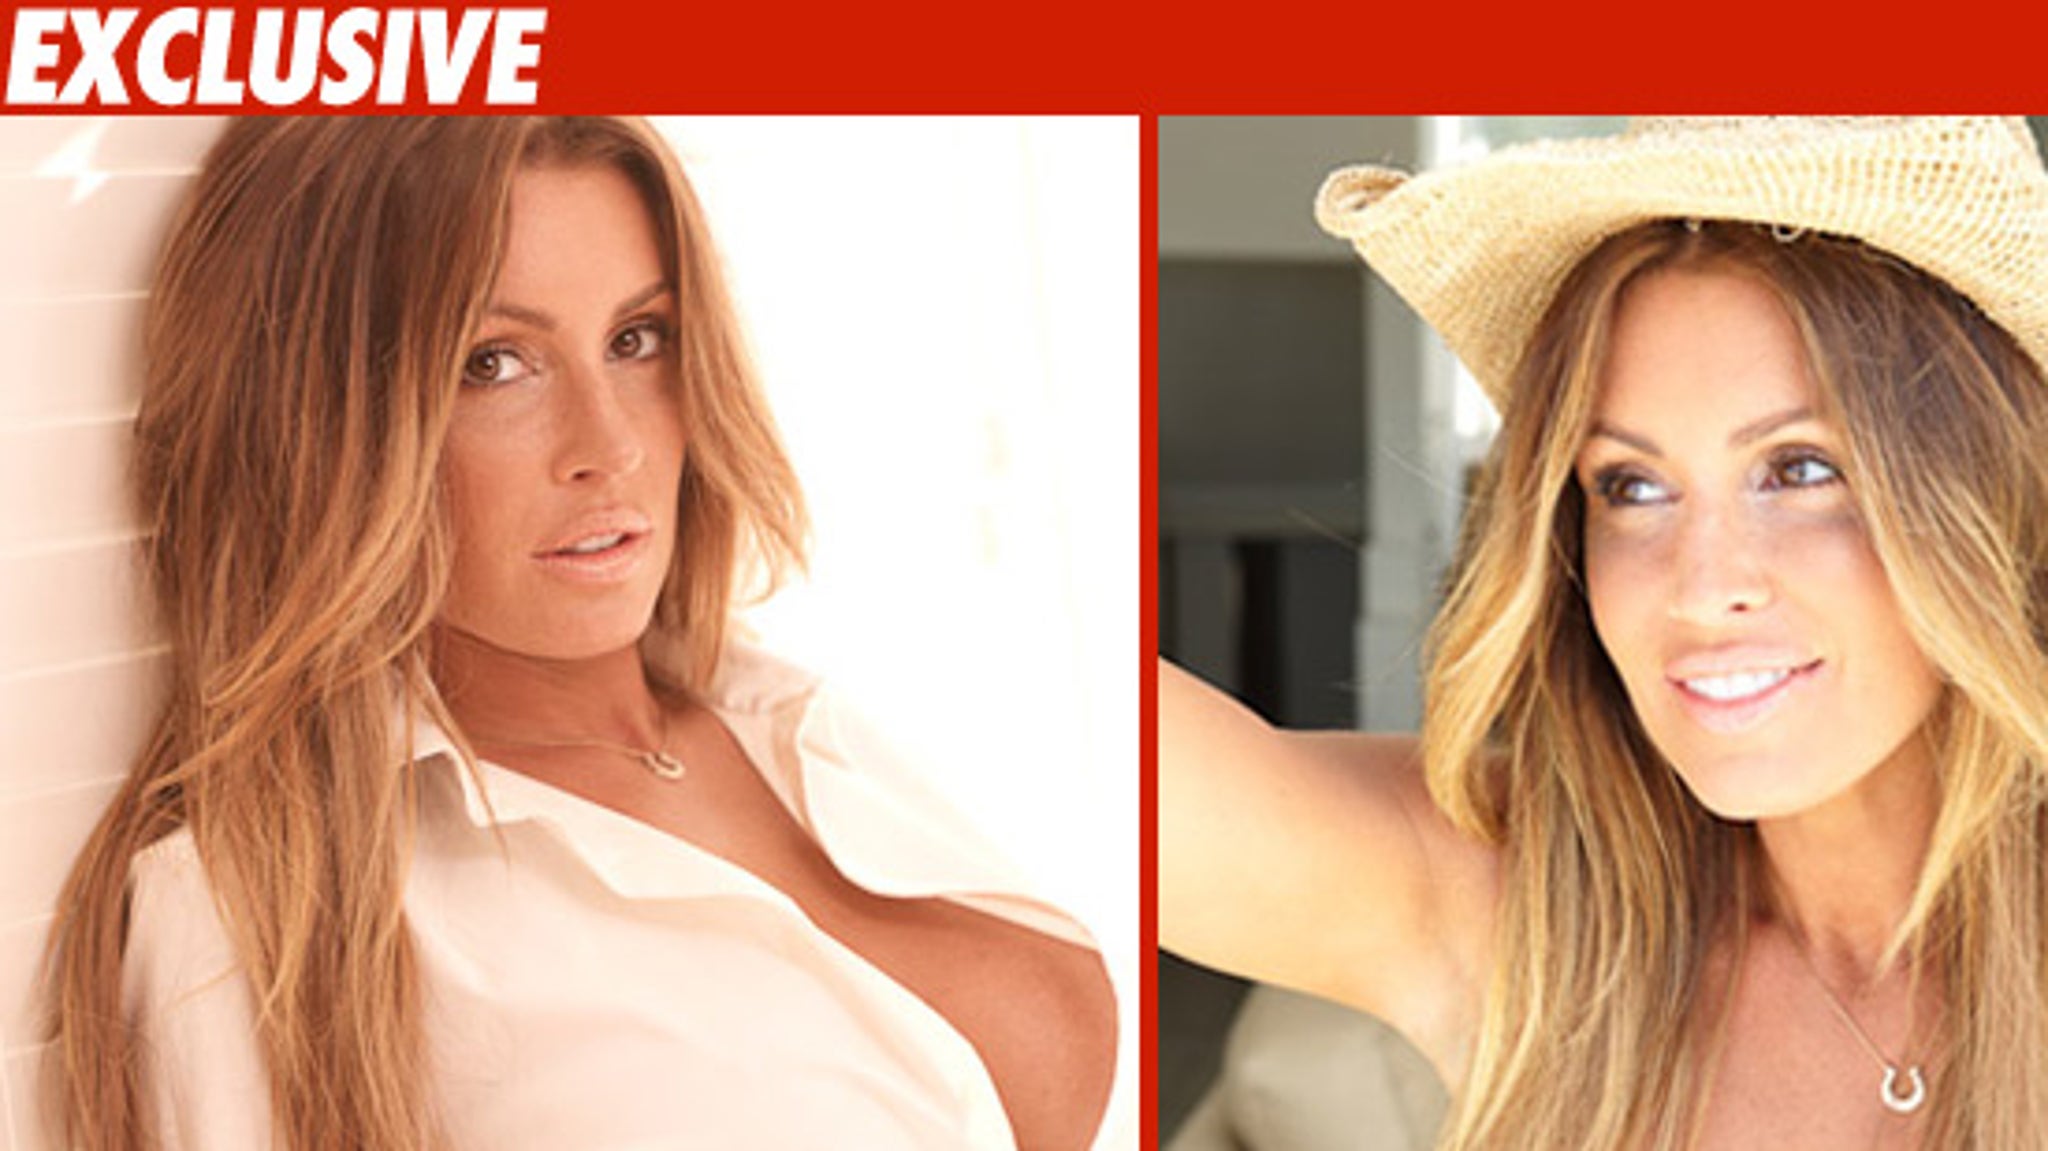 TMZ has learned Rachel Uchitel has signed a deal to get naked for Playboy M...